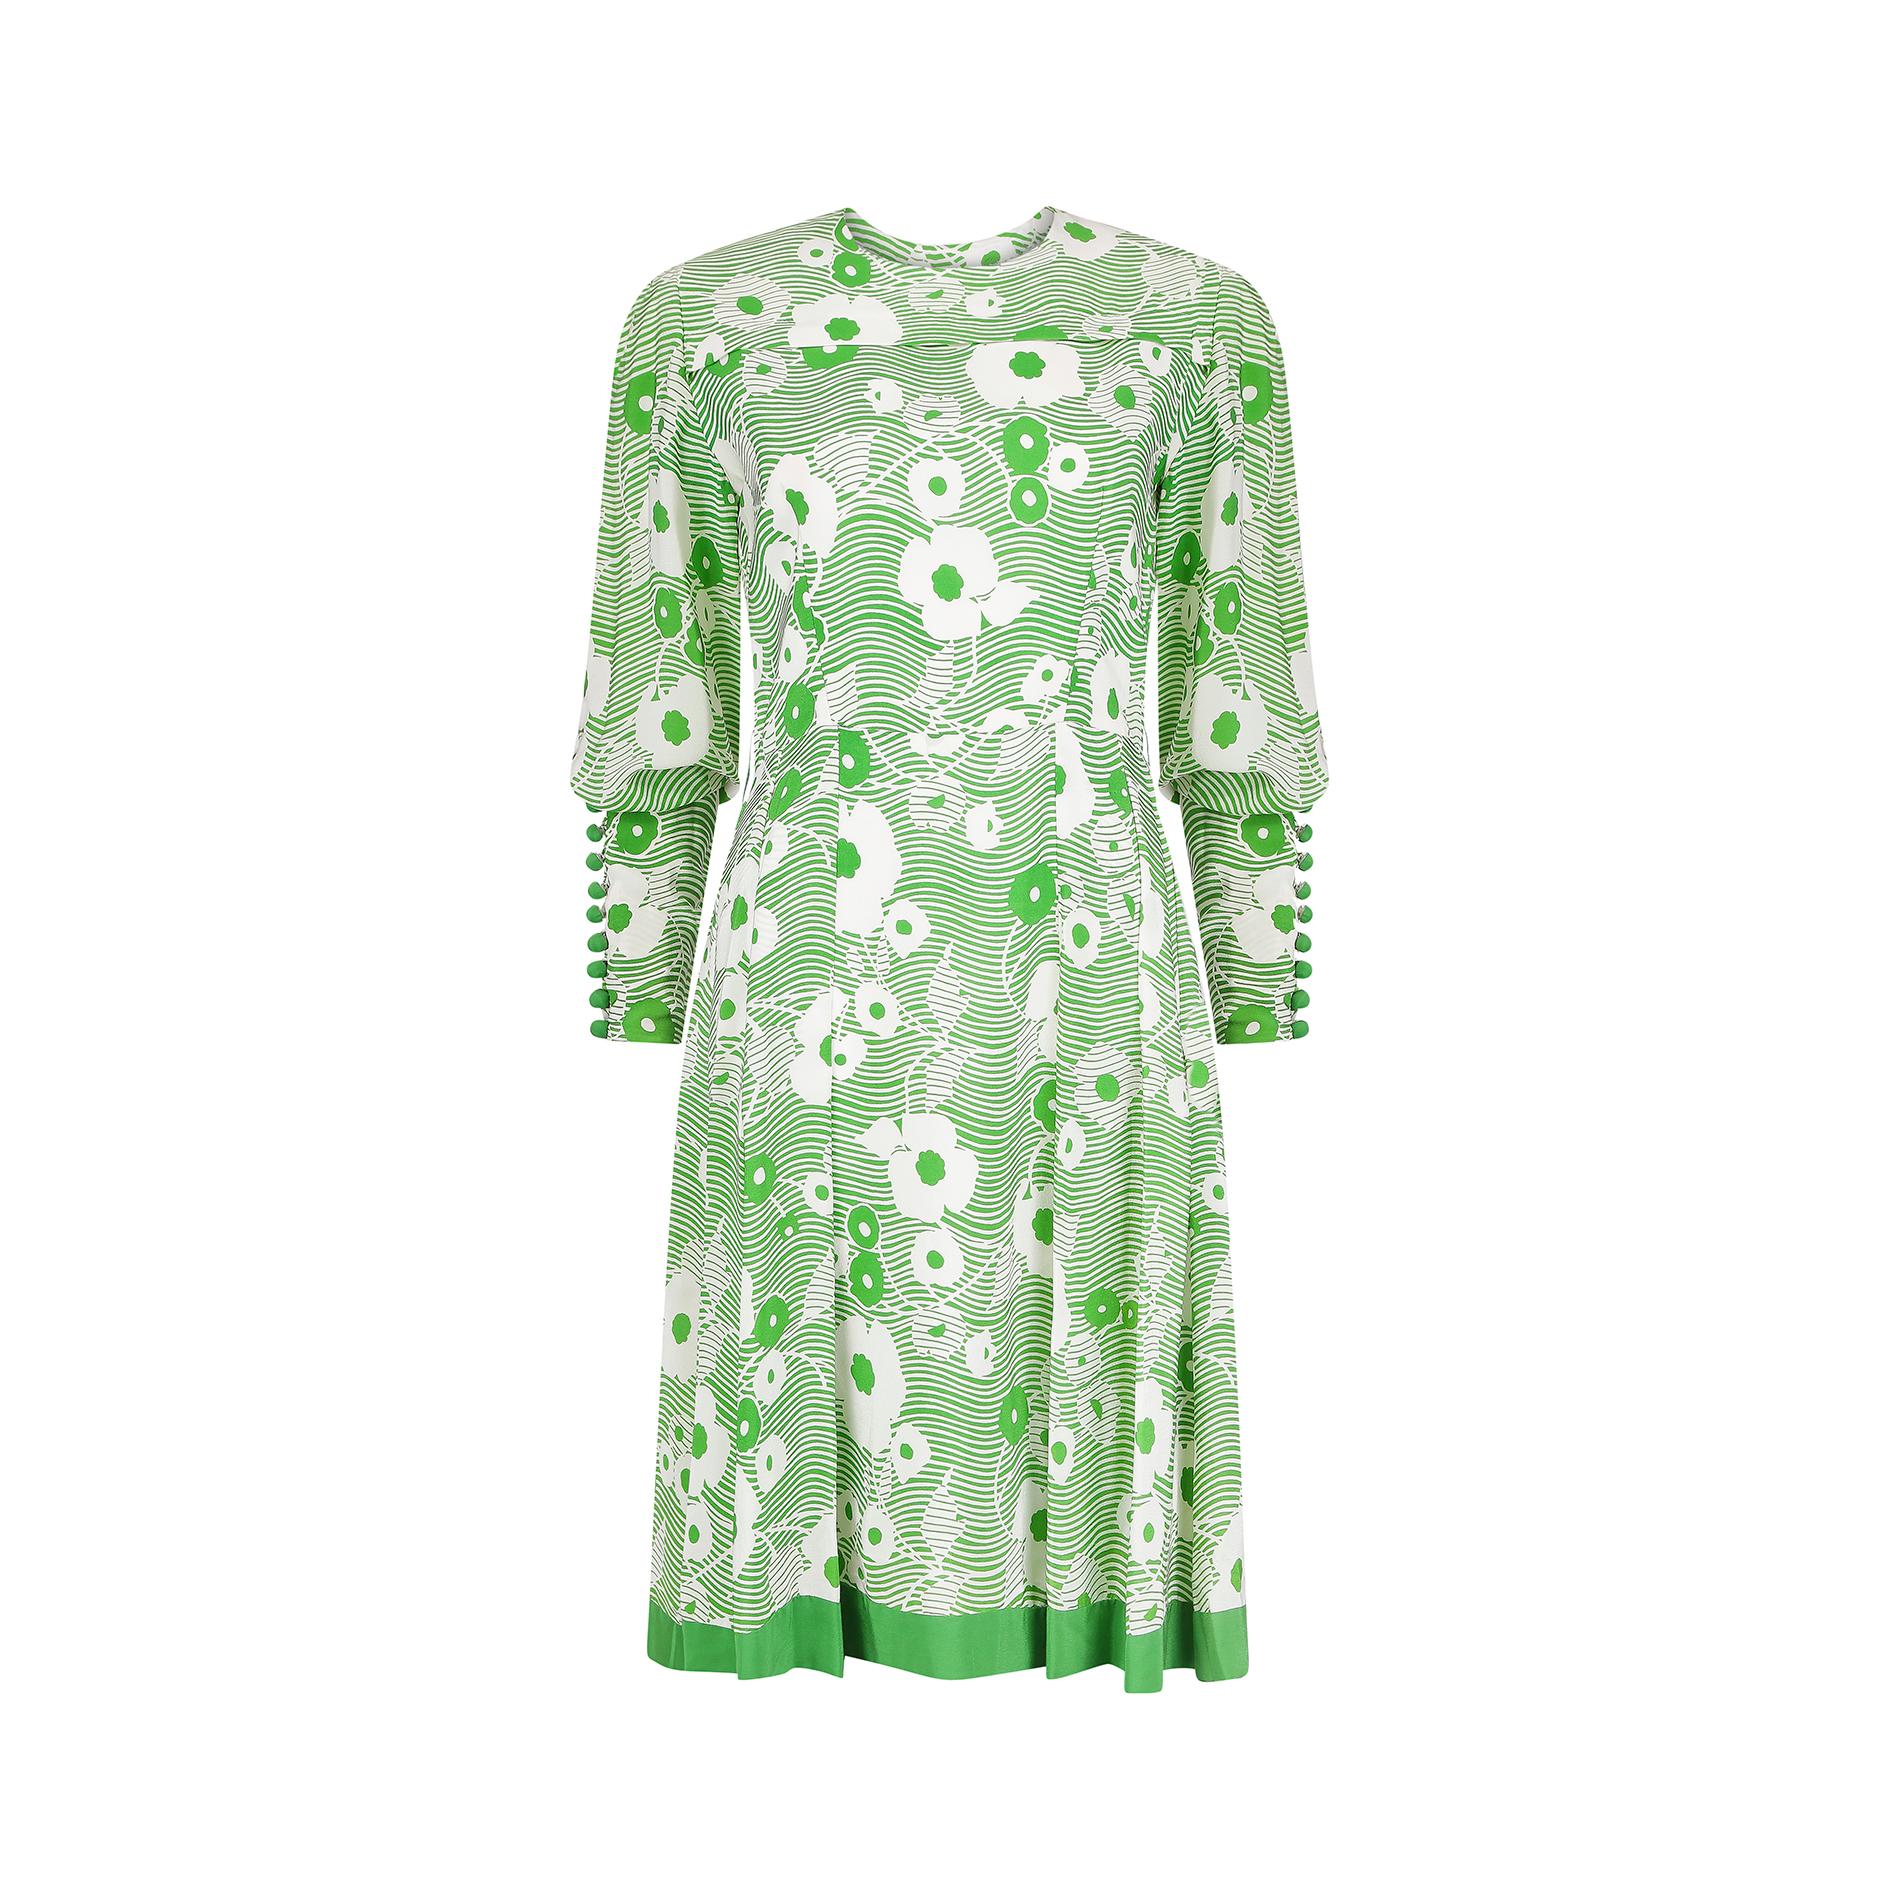 This 1970s French couture green and white dress in silk crepe features a striking floral fabric design. It has a softly rounded neckline and fastens down the back with an original white couture zip, complete with hook and eye fastening. The print